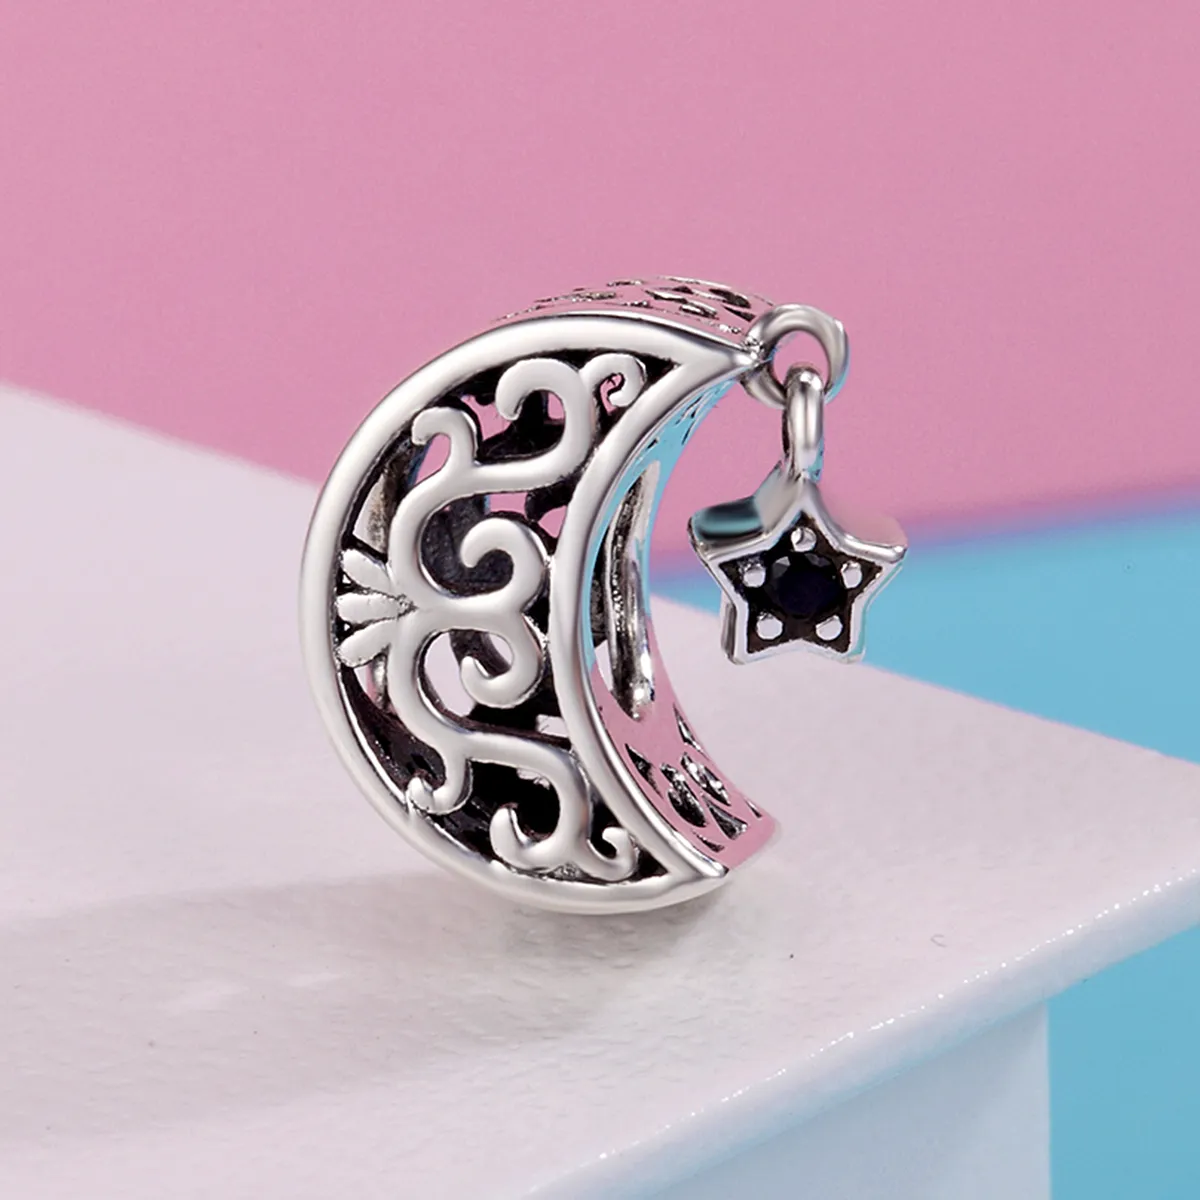 Pandora Style Silver Moon And Star Charm - SCC483